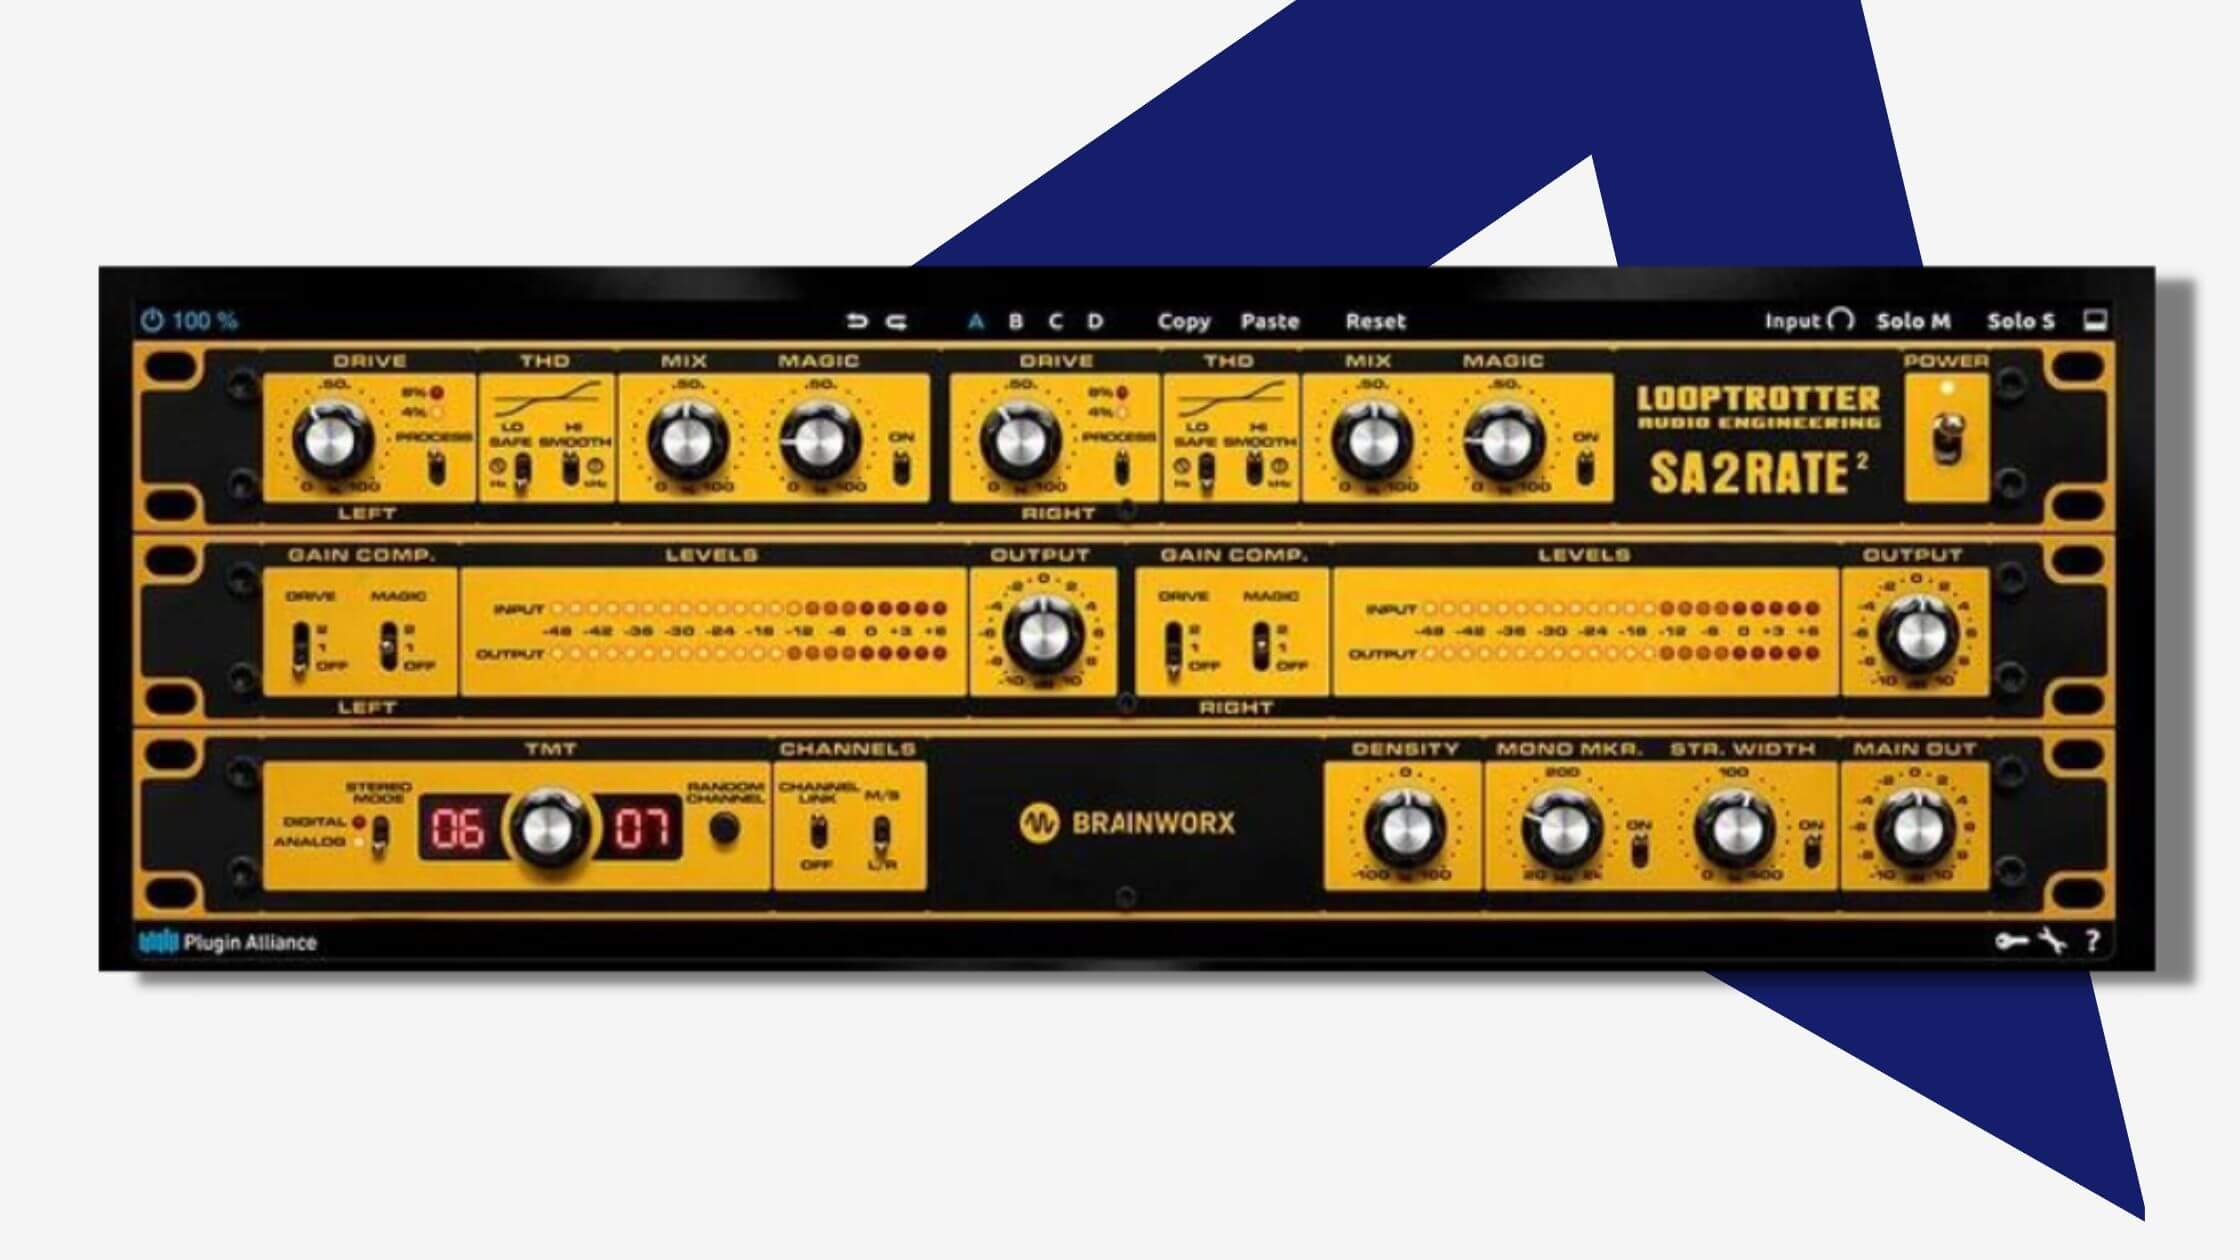 Plugin Alliance releases SA2RATE saturator effect: an emulation of Looptrotter’s SA2RATE hardware